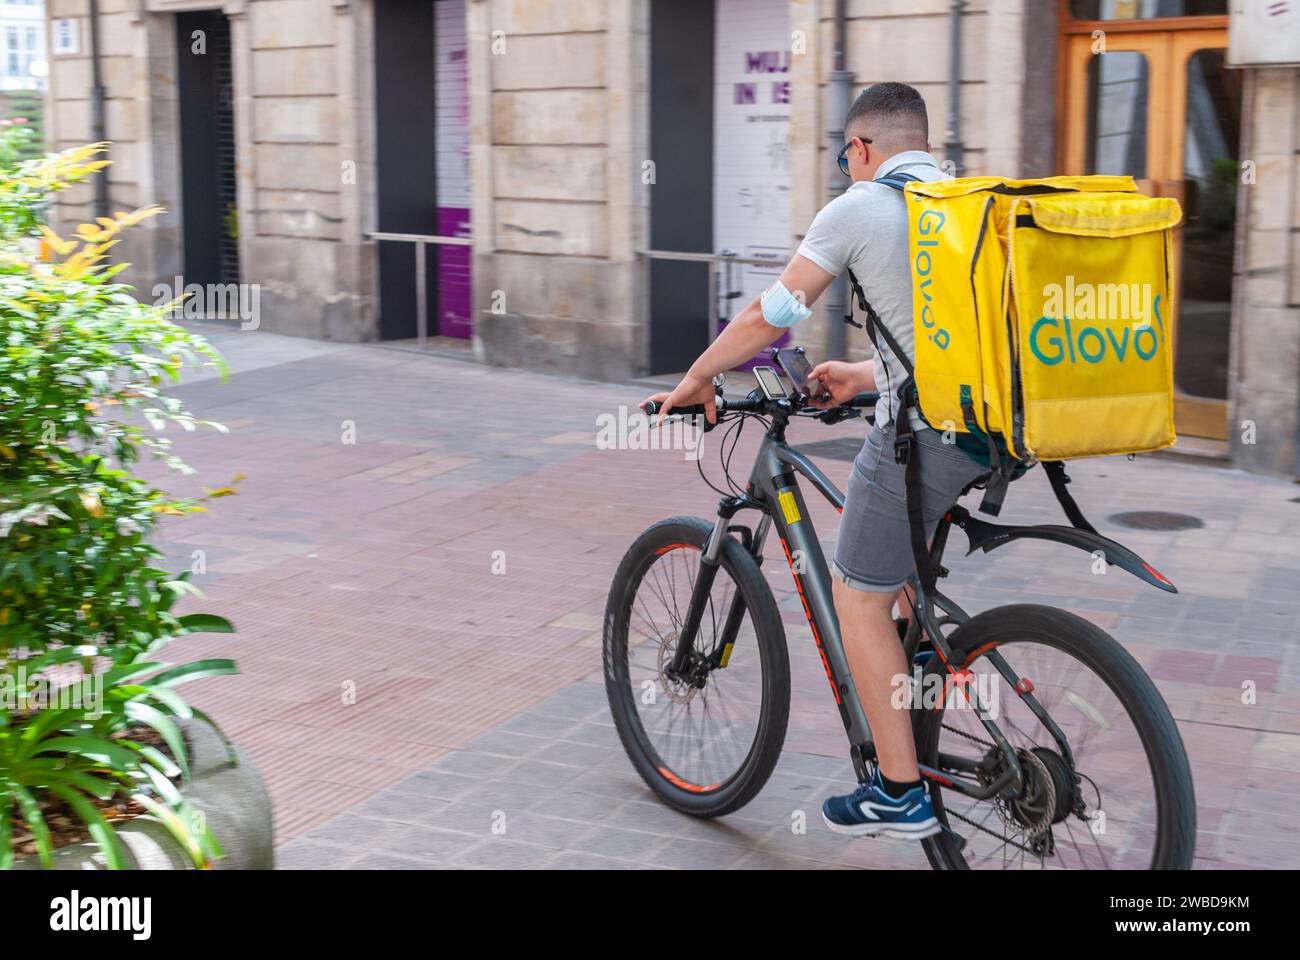 Vitoria, Euskadi, Basque Country - January 28, 2020 - Photo of fast food delivery boy, concept of change of traditional gastronomic culture. Stock Photo